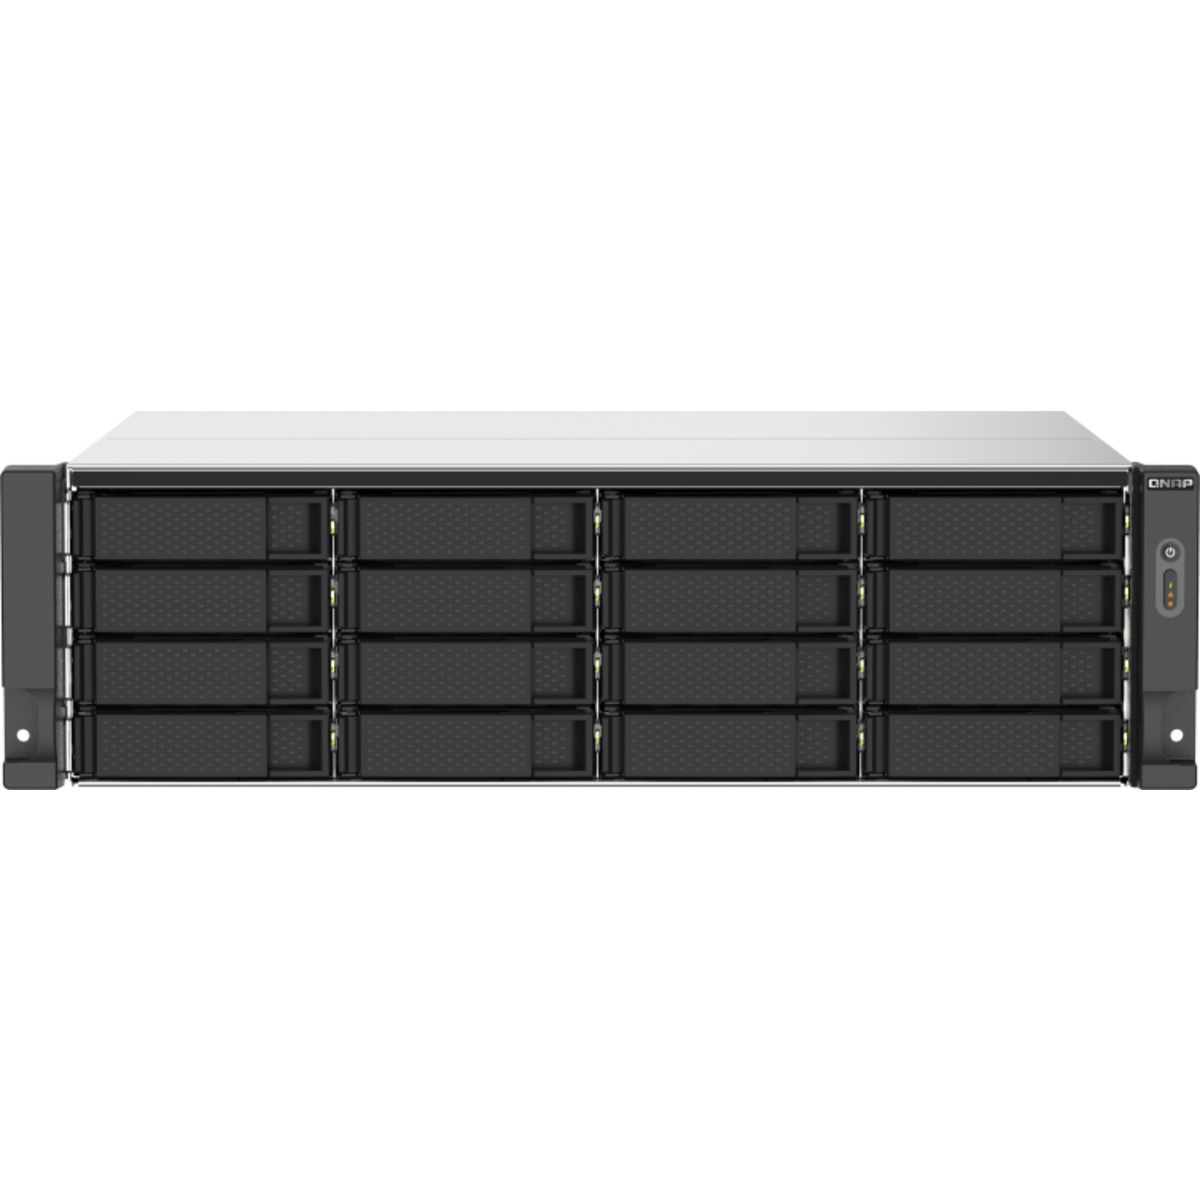 QNAP TS-1673AU-RP 192tb 16-Bay RackMount Multimedia / Power User / Business NAS - Network Attached Storage Device 16x12tb Seagate EXOS X18 ST12000NM000J 3.5 7200rpm SATA 6Gb/s HDD ENTERPRISE Class Drives Installed - Burn-In Tested - FREE RAM UPGRADE TS-1673AU-RP